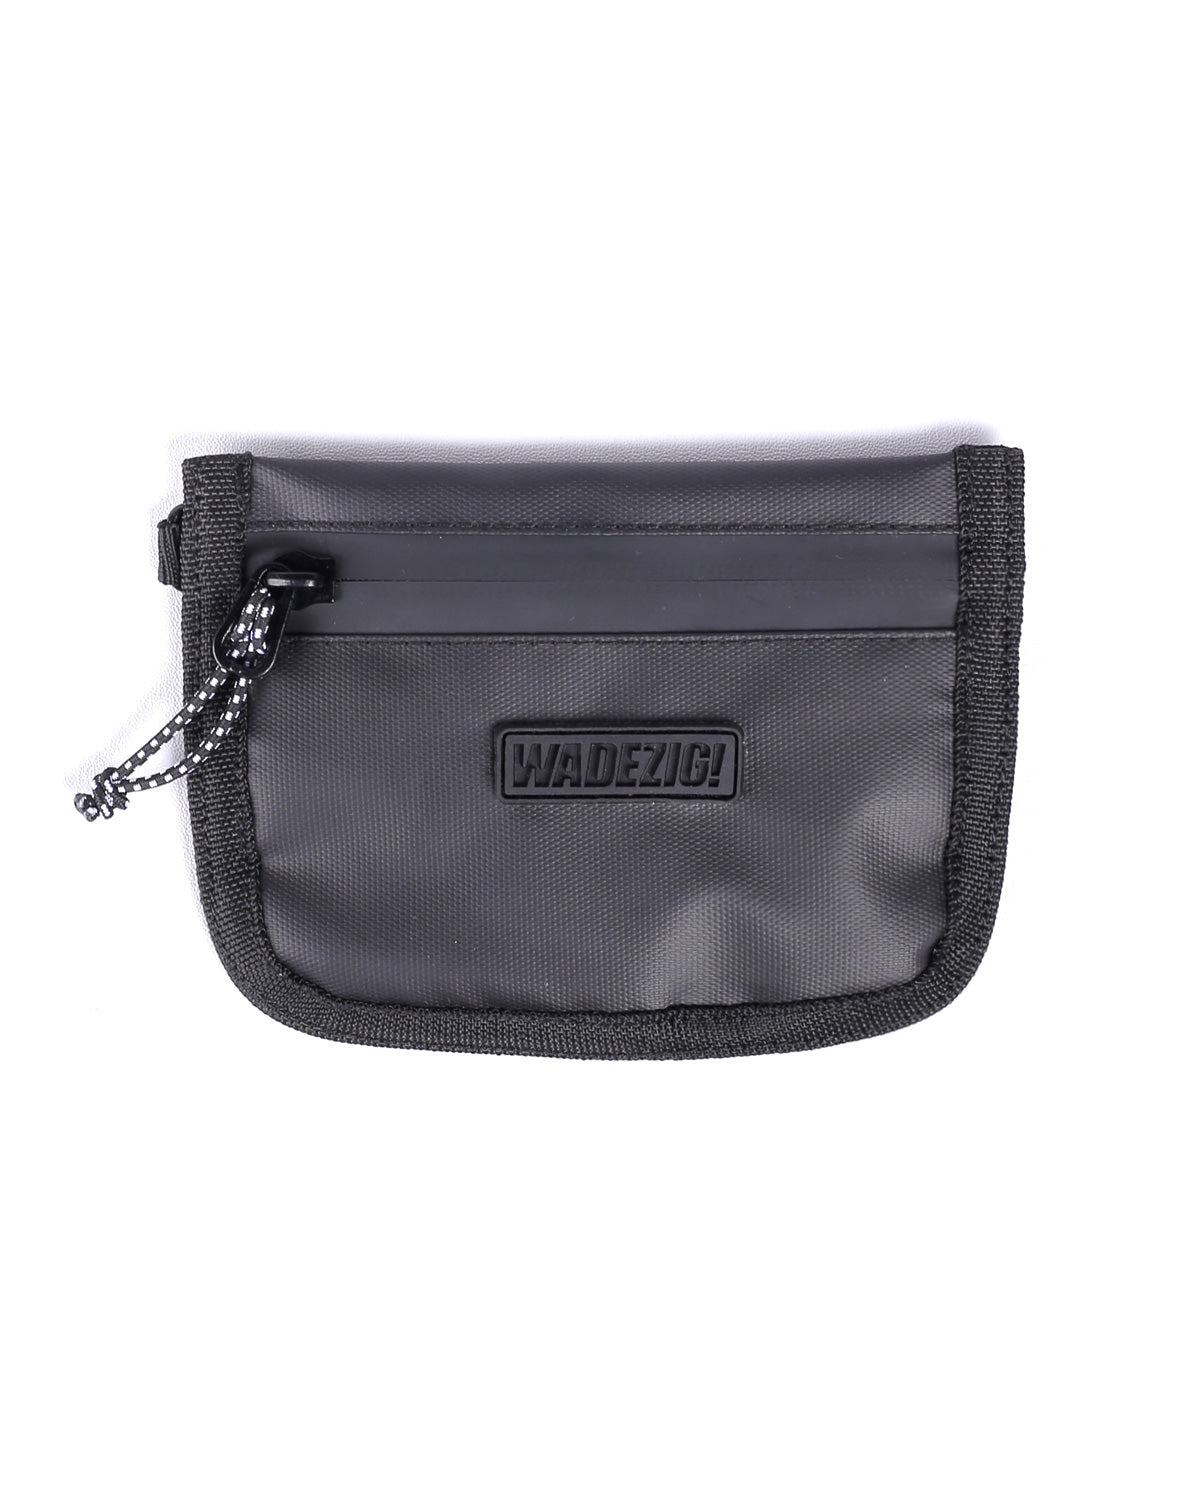 WADEZIG! ACCESSORIES - SIMPLY POUCH BLACK